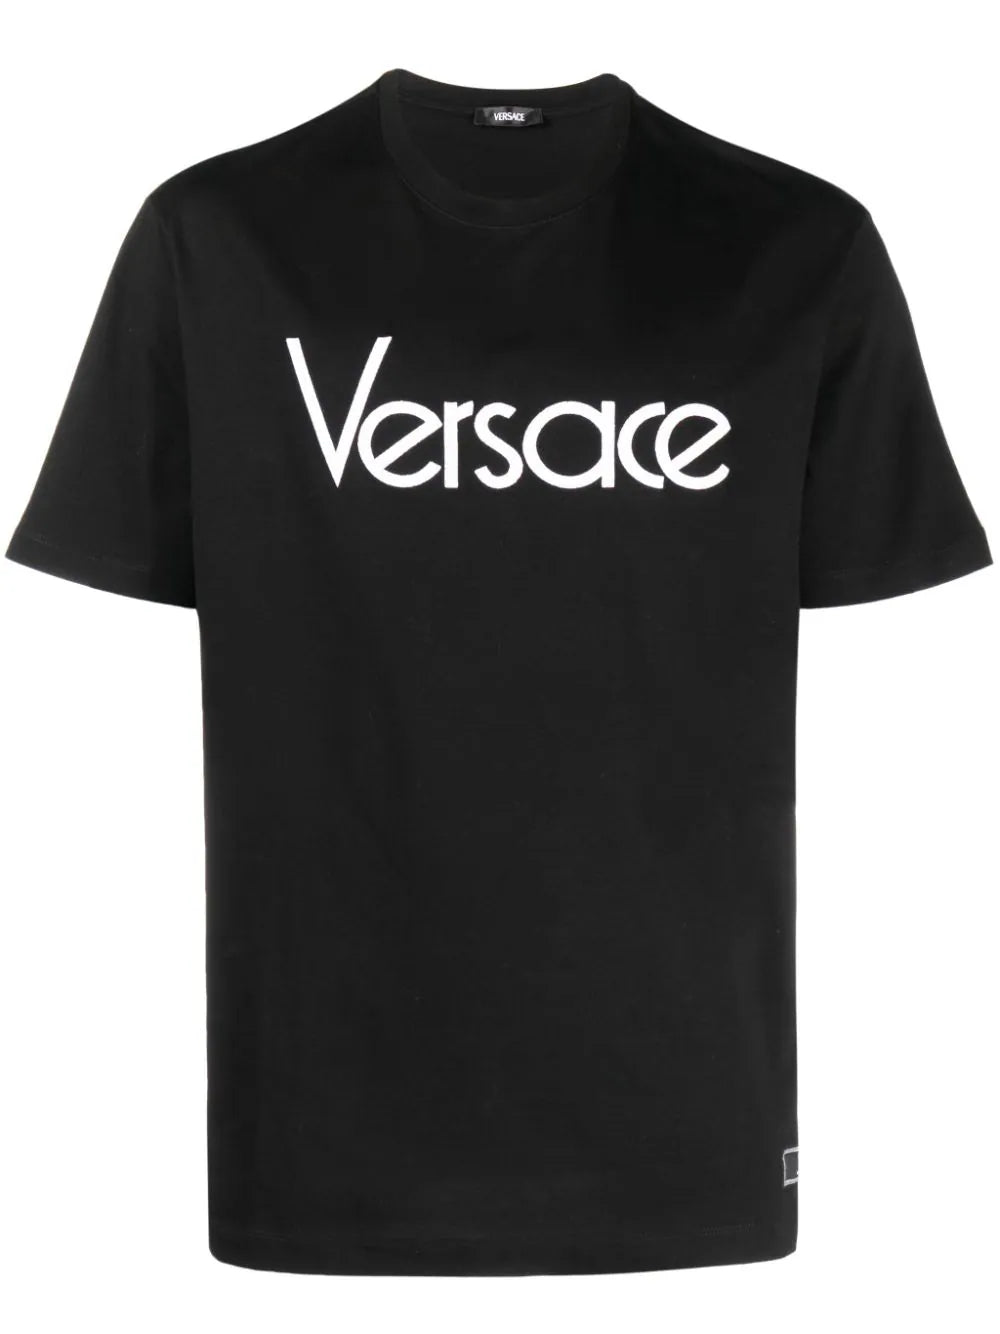 Versace Black Embroidered Tribute T-shirt